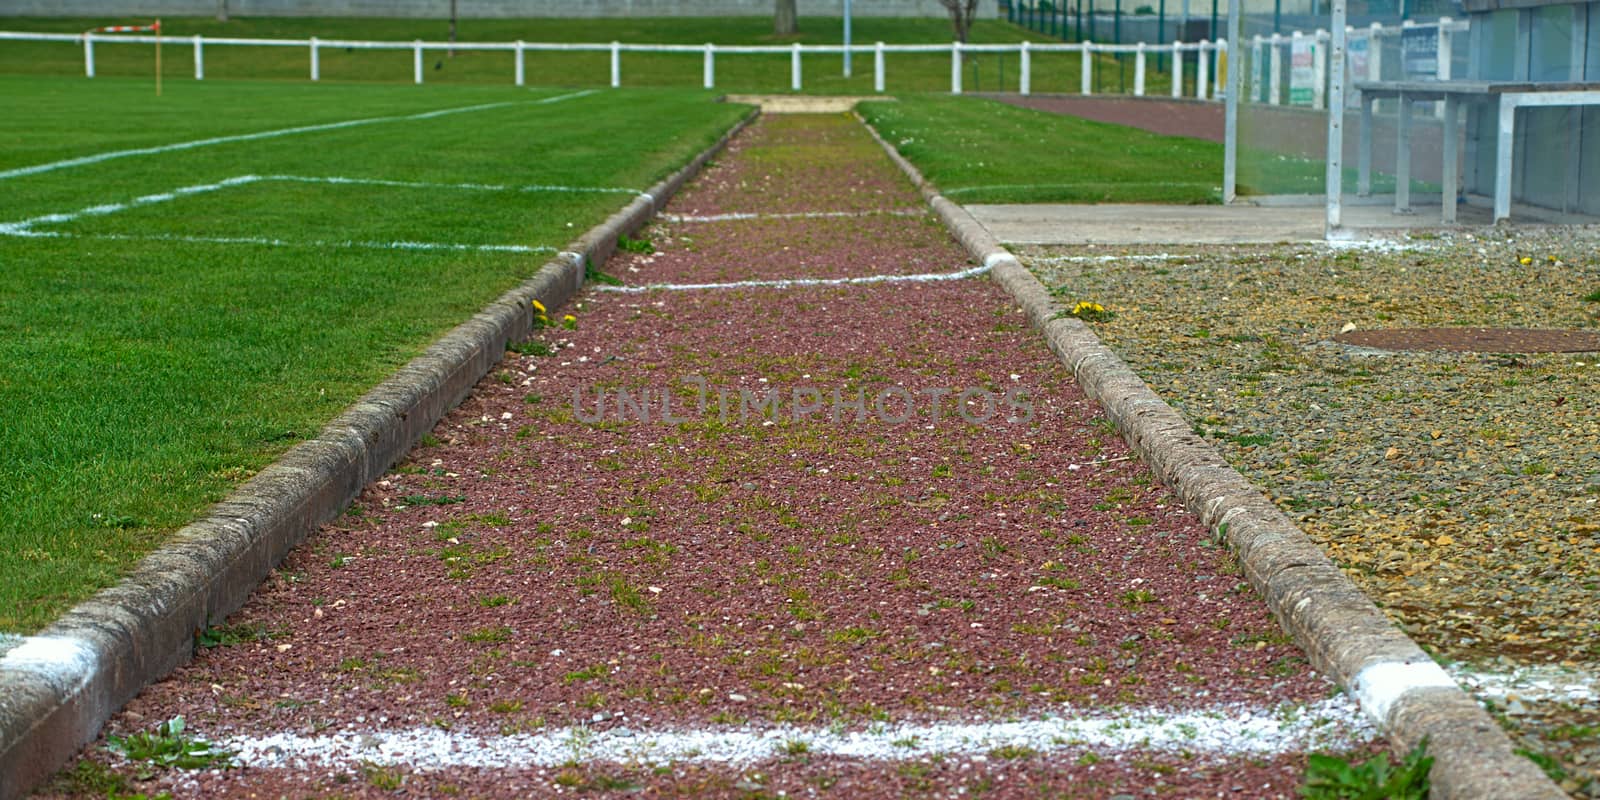 Long jump path on a stadium, front view by sheriffkule